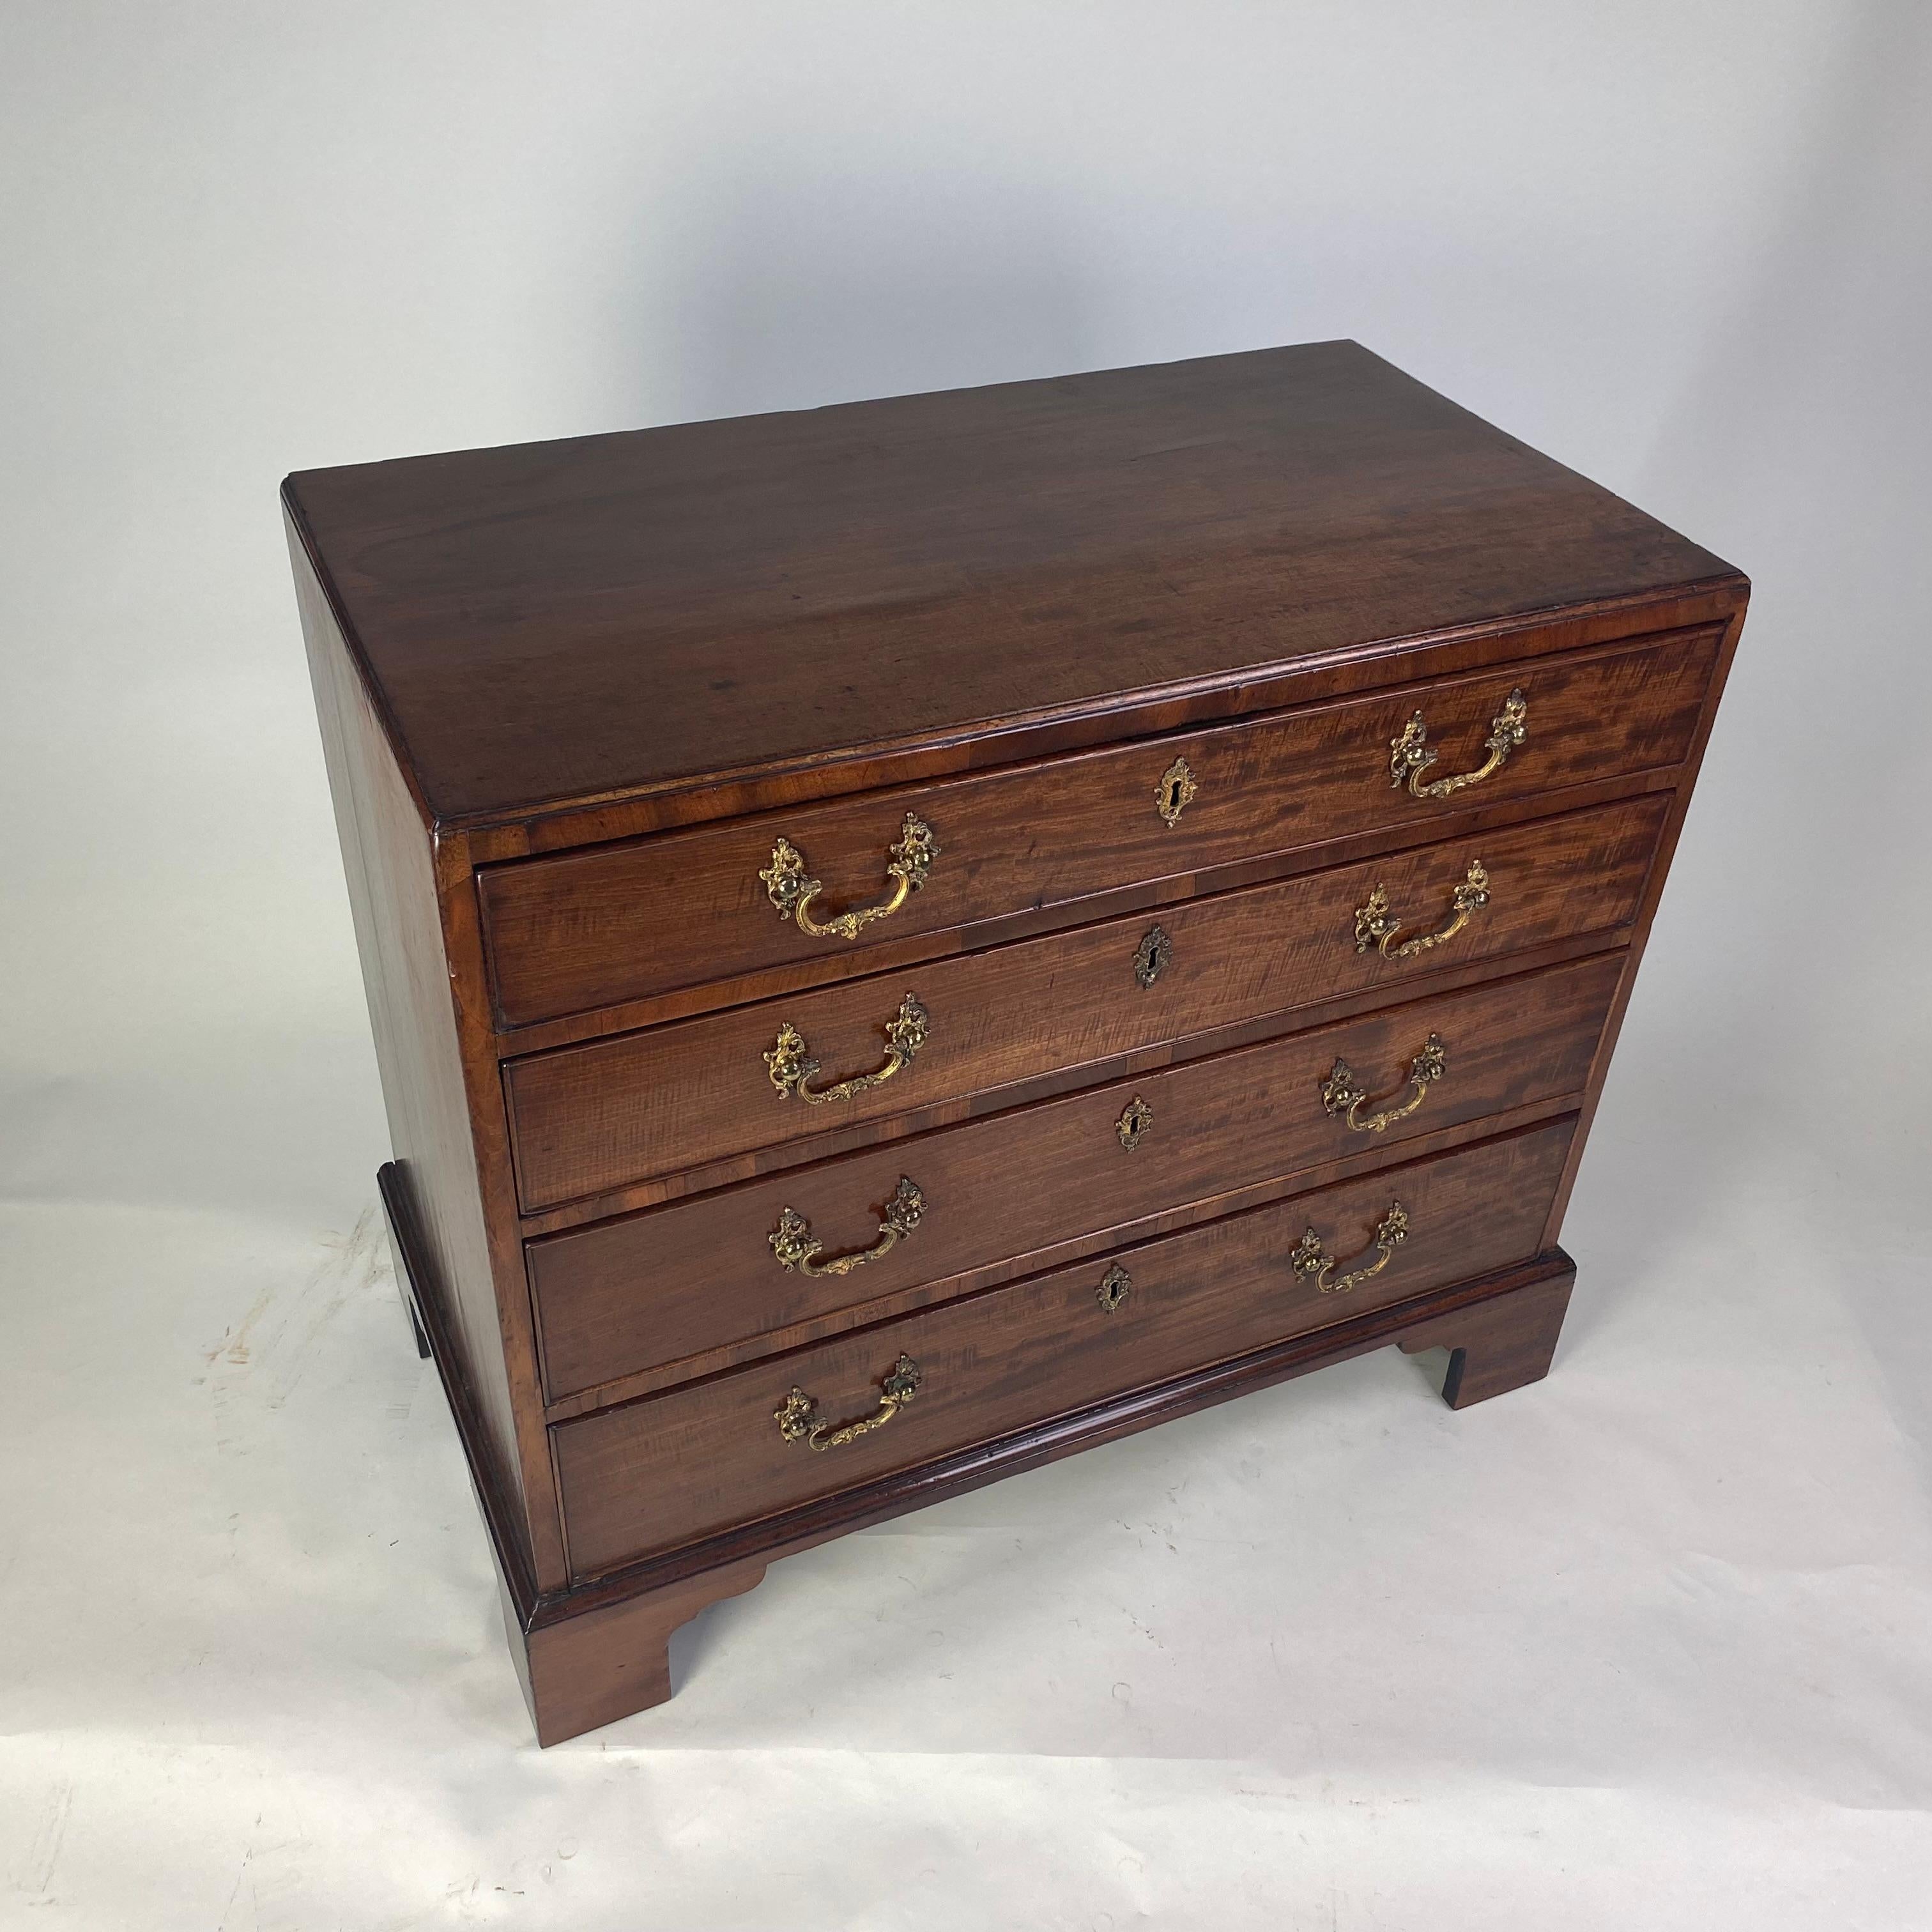 A fine quality late 18th century chest of drawers of small size, with moulded edge caddy-top abouve four long graduated drawers, the top of which is fully filtted with various lidded and open compartments for dressing acoutrements. Standing on